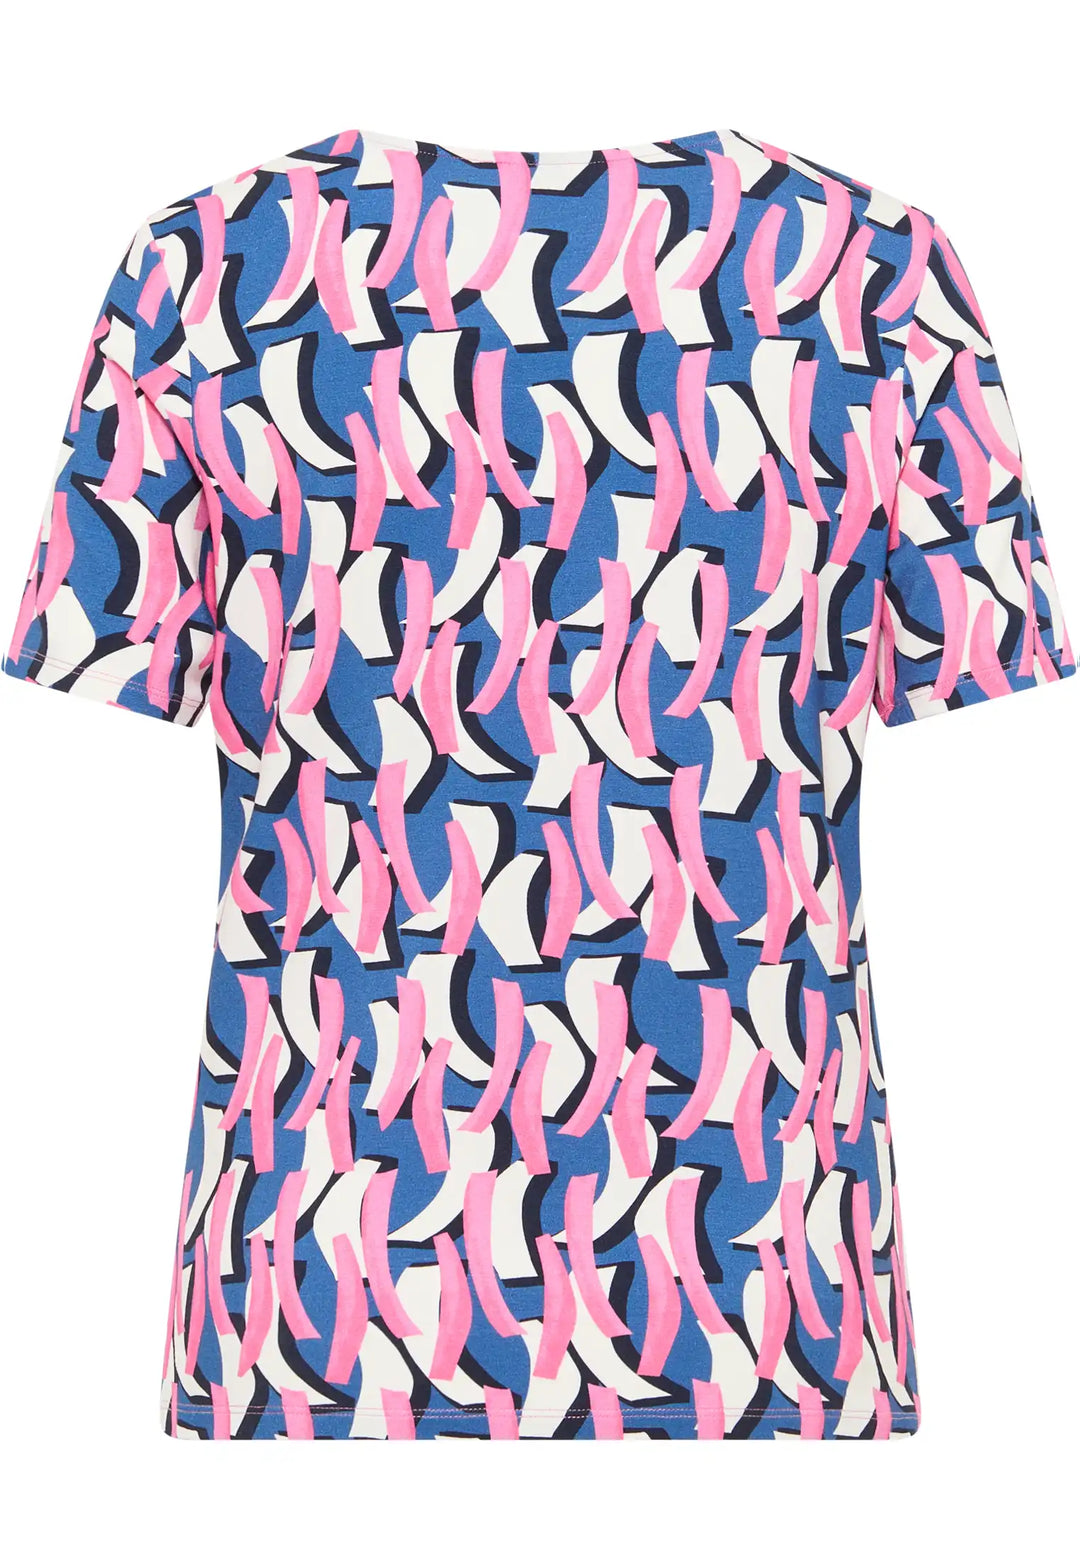 Back view of a vibrant pink and navy ribbon print top with  V-neckline and casual fit, Style 62000042-530